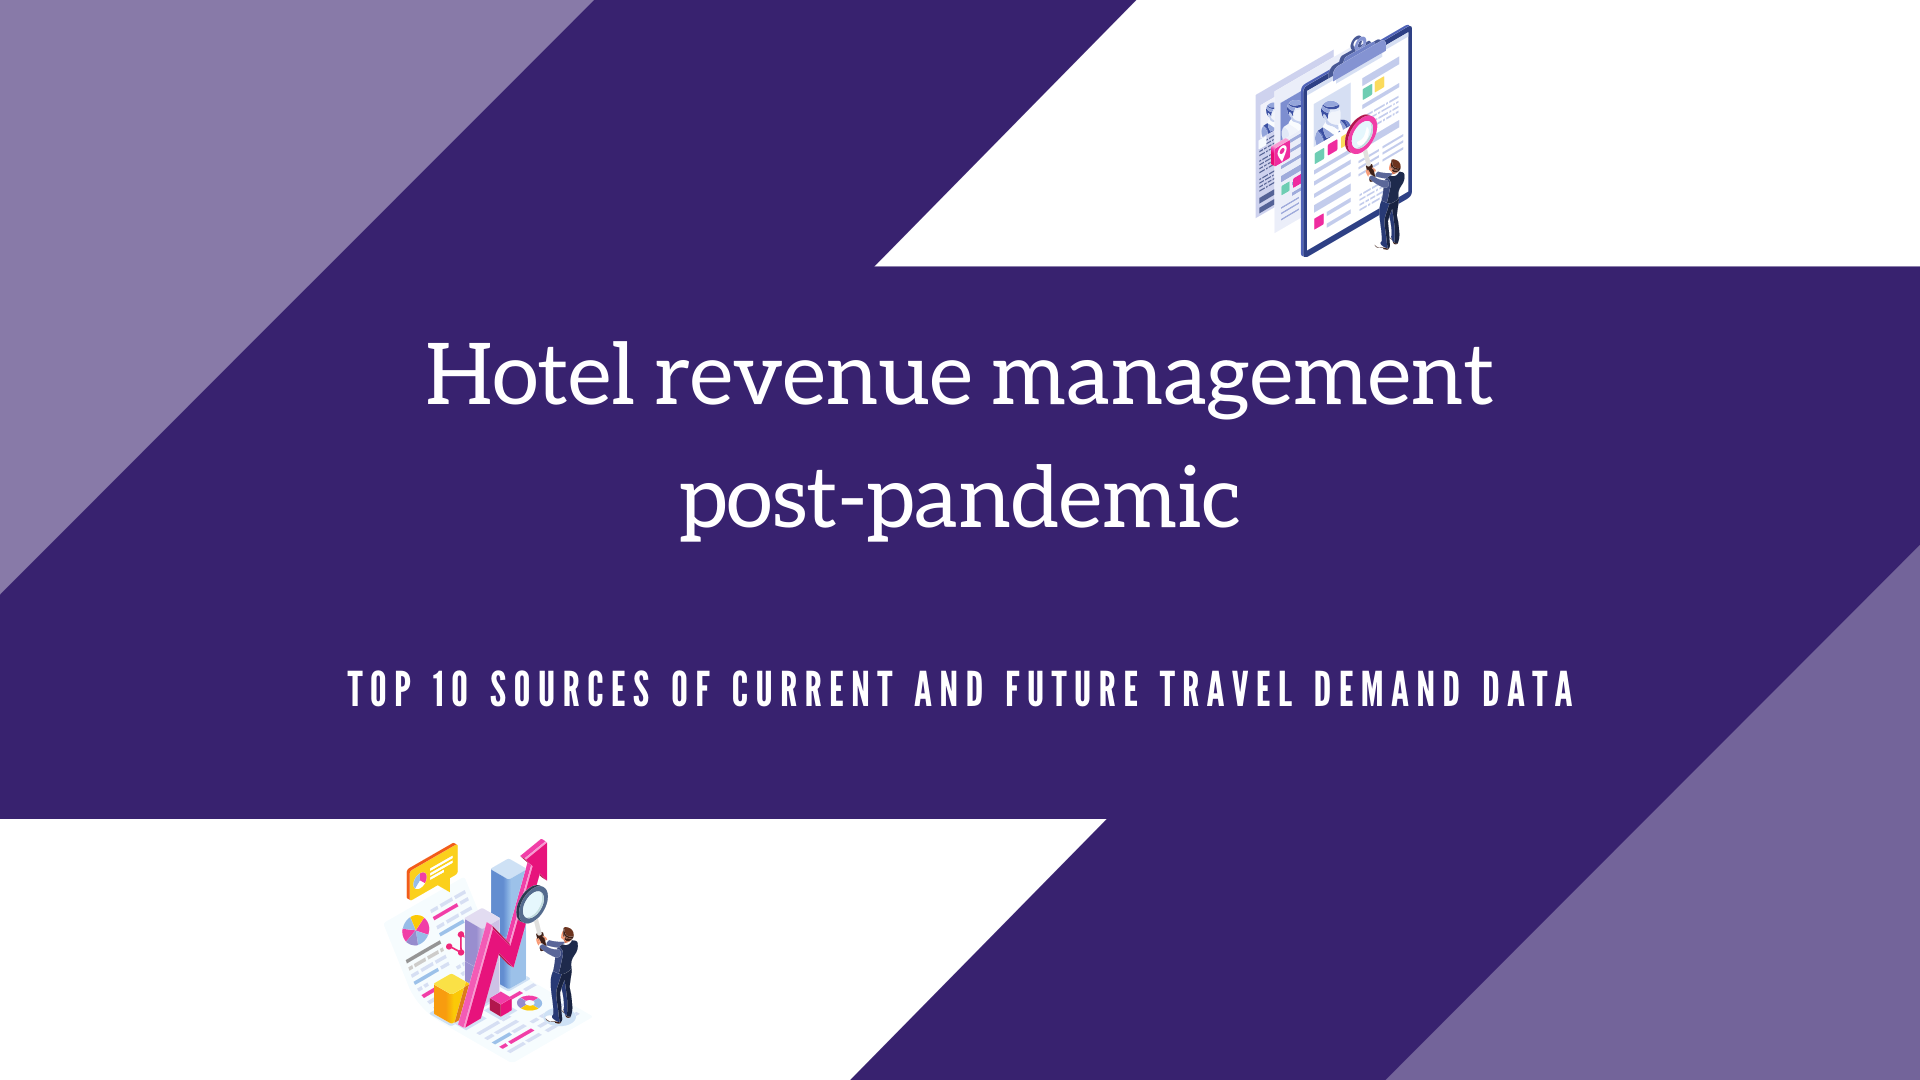 Hotel revenue management post-pandemic: Top 10 sources of current and future travel demand data